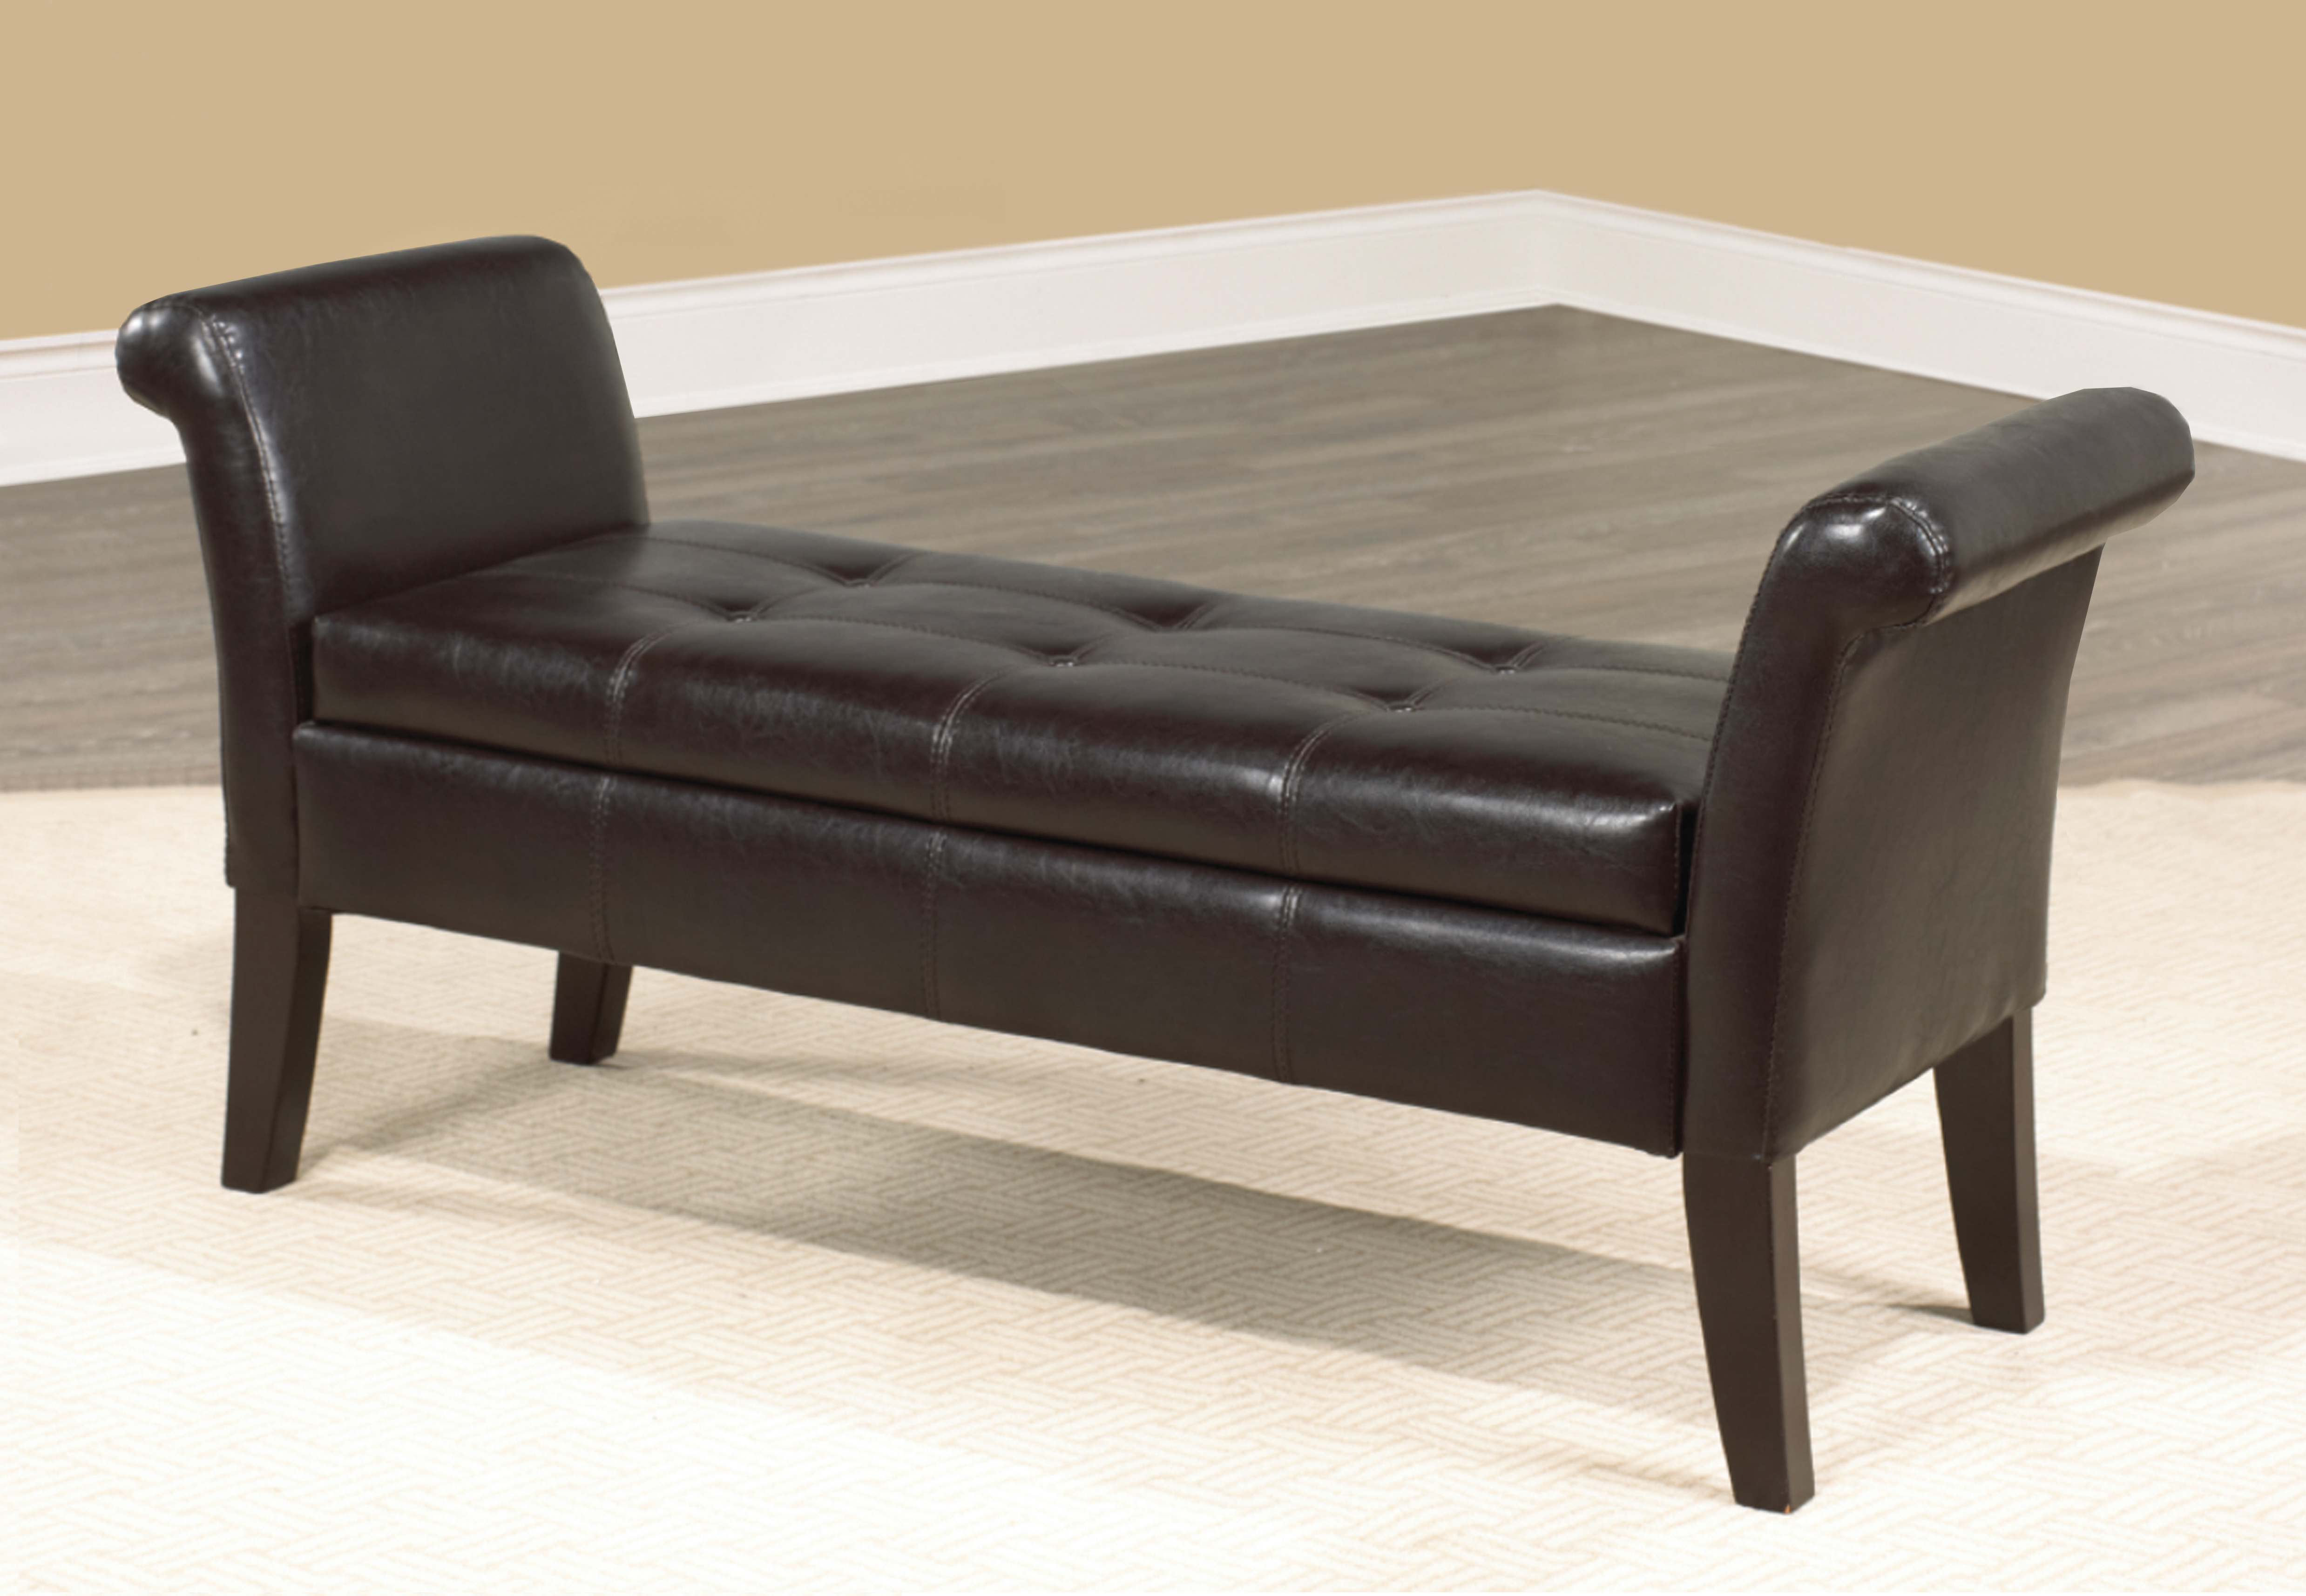 Black Leather Storage Bench, Black Leather Storage Bench With Arms